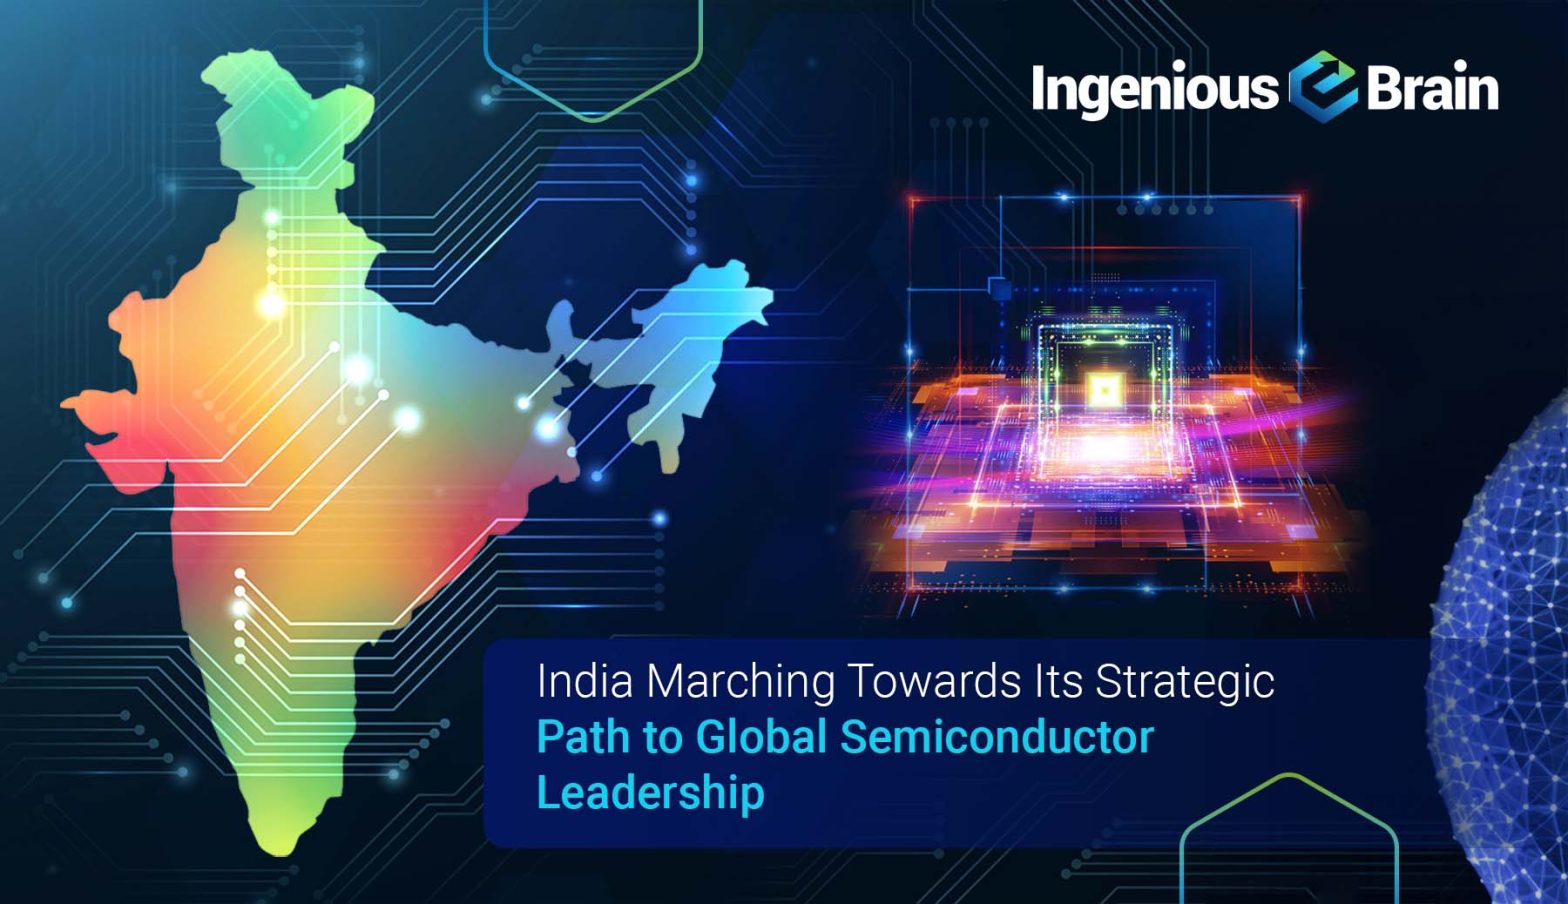 India Marching Towards its strategic path to global semiconductor leadership - Ingenious e-Brain